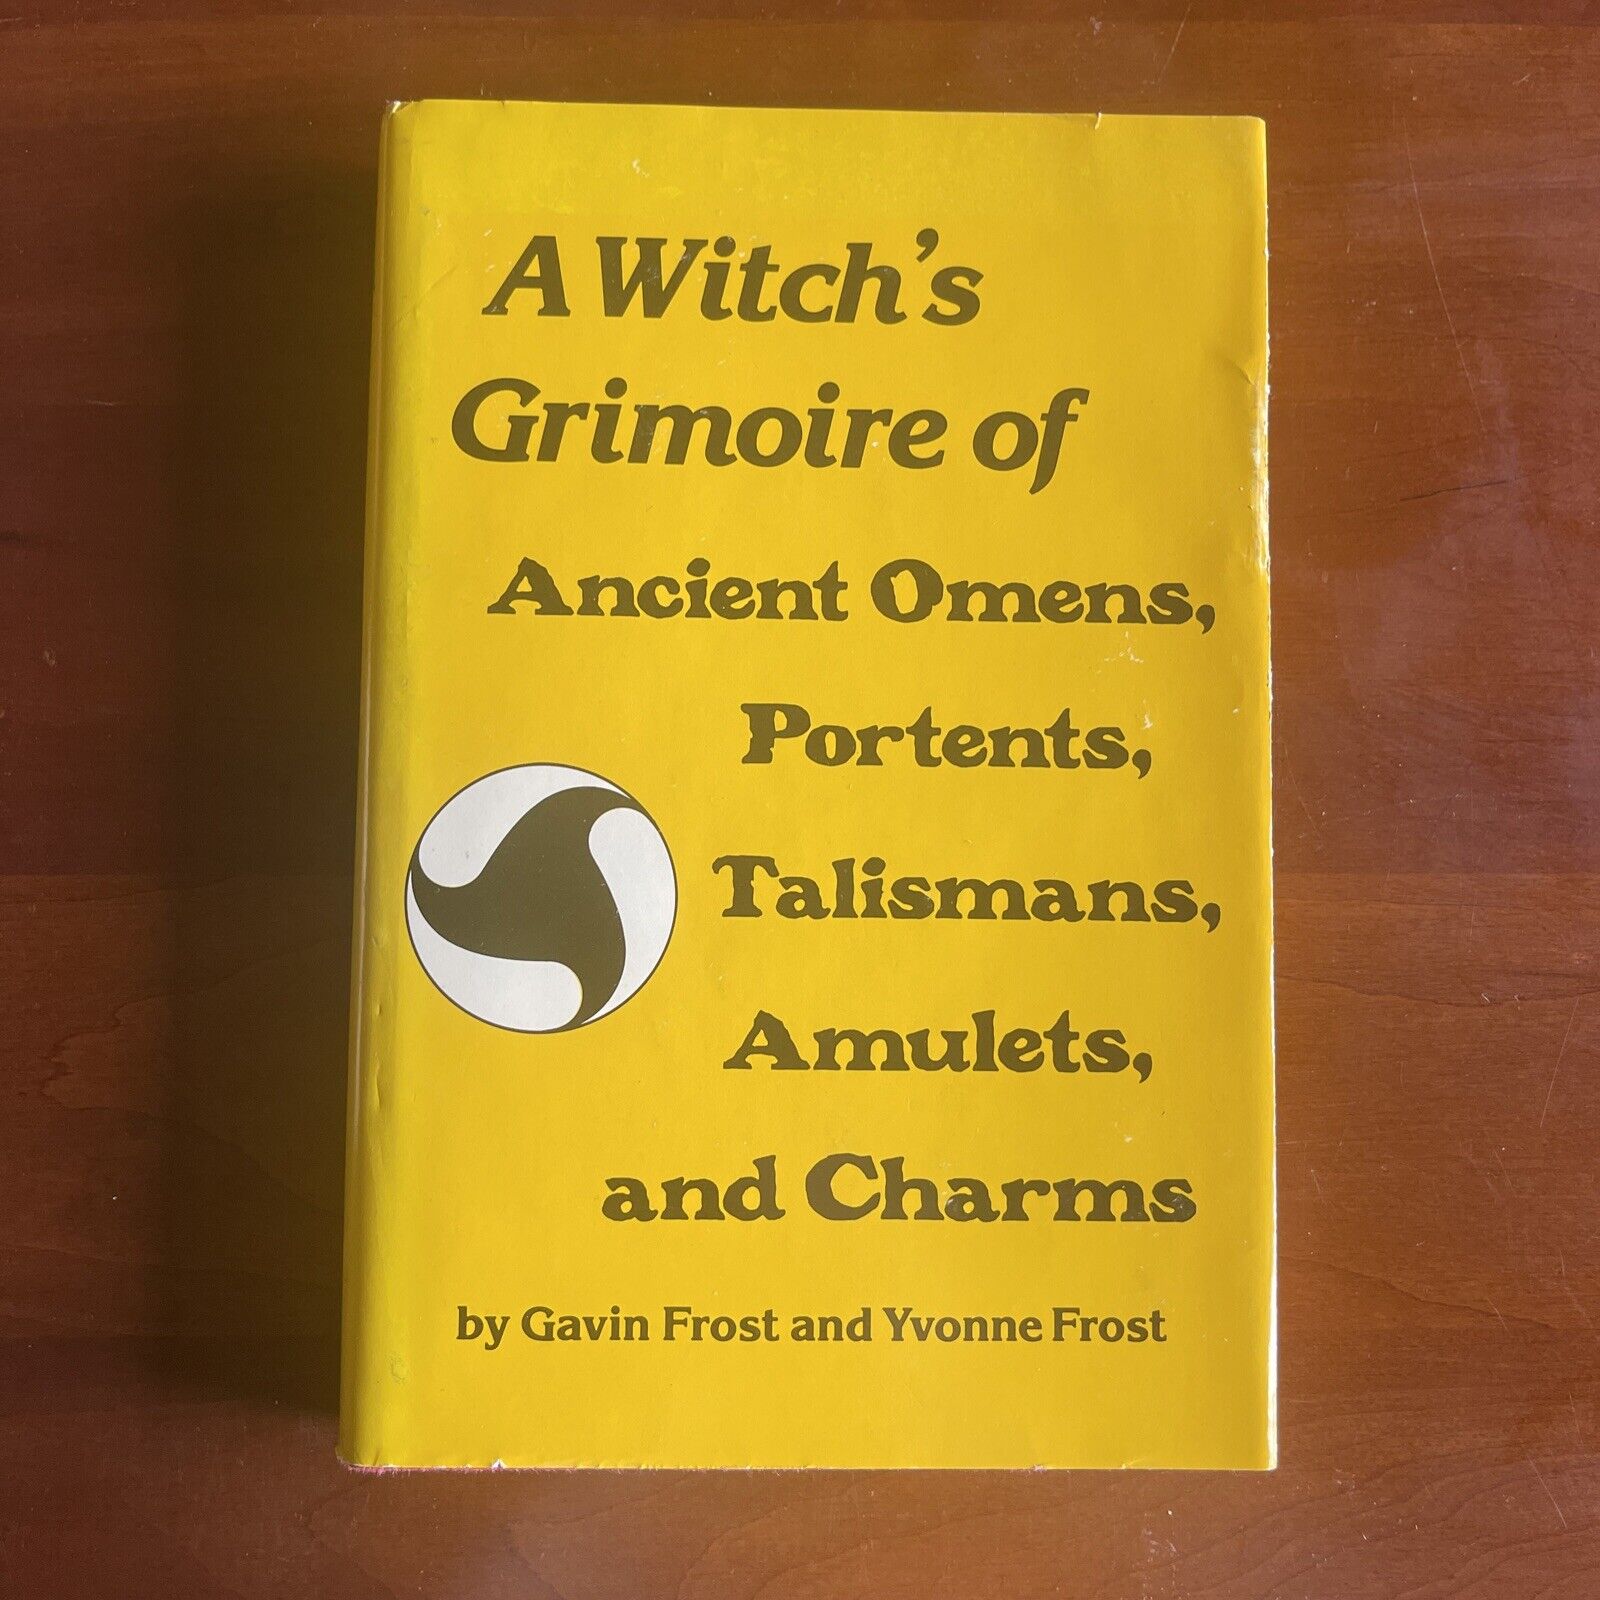 A Witches Grimoire - Wicca Witchcraft Spell book - (1979, Parker -Hard To Find